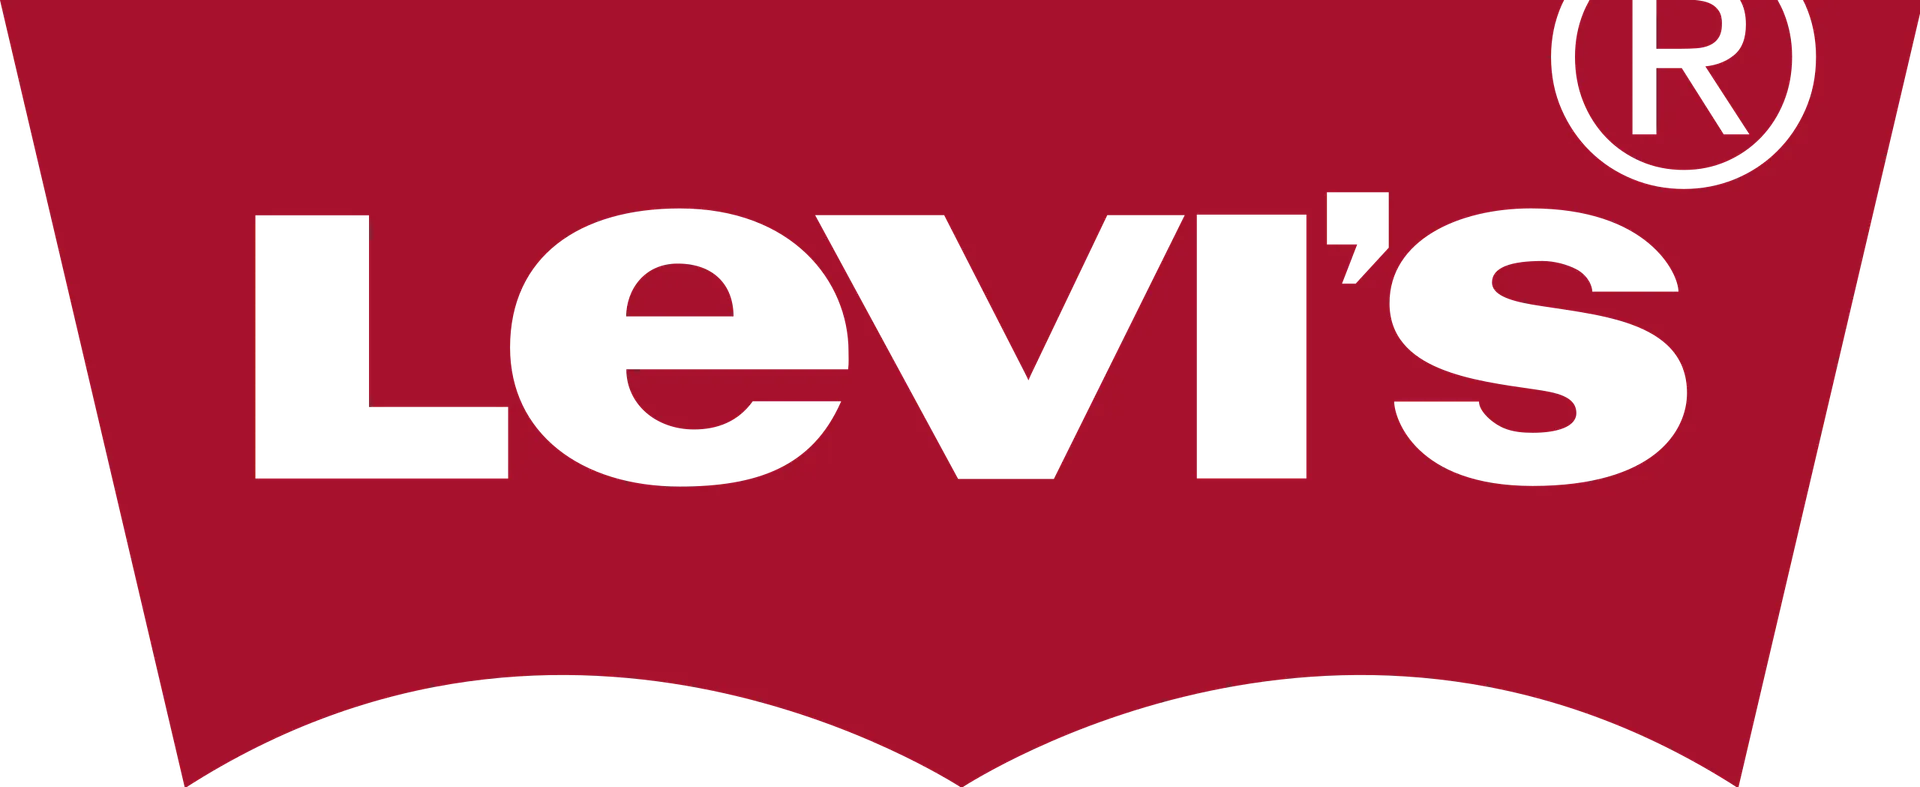 LEVIS logo current weekly ad